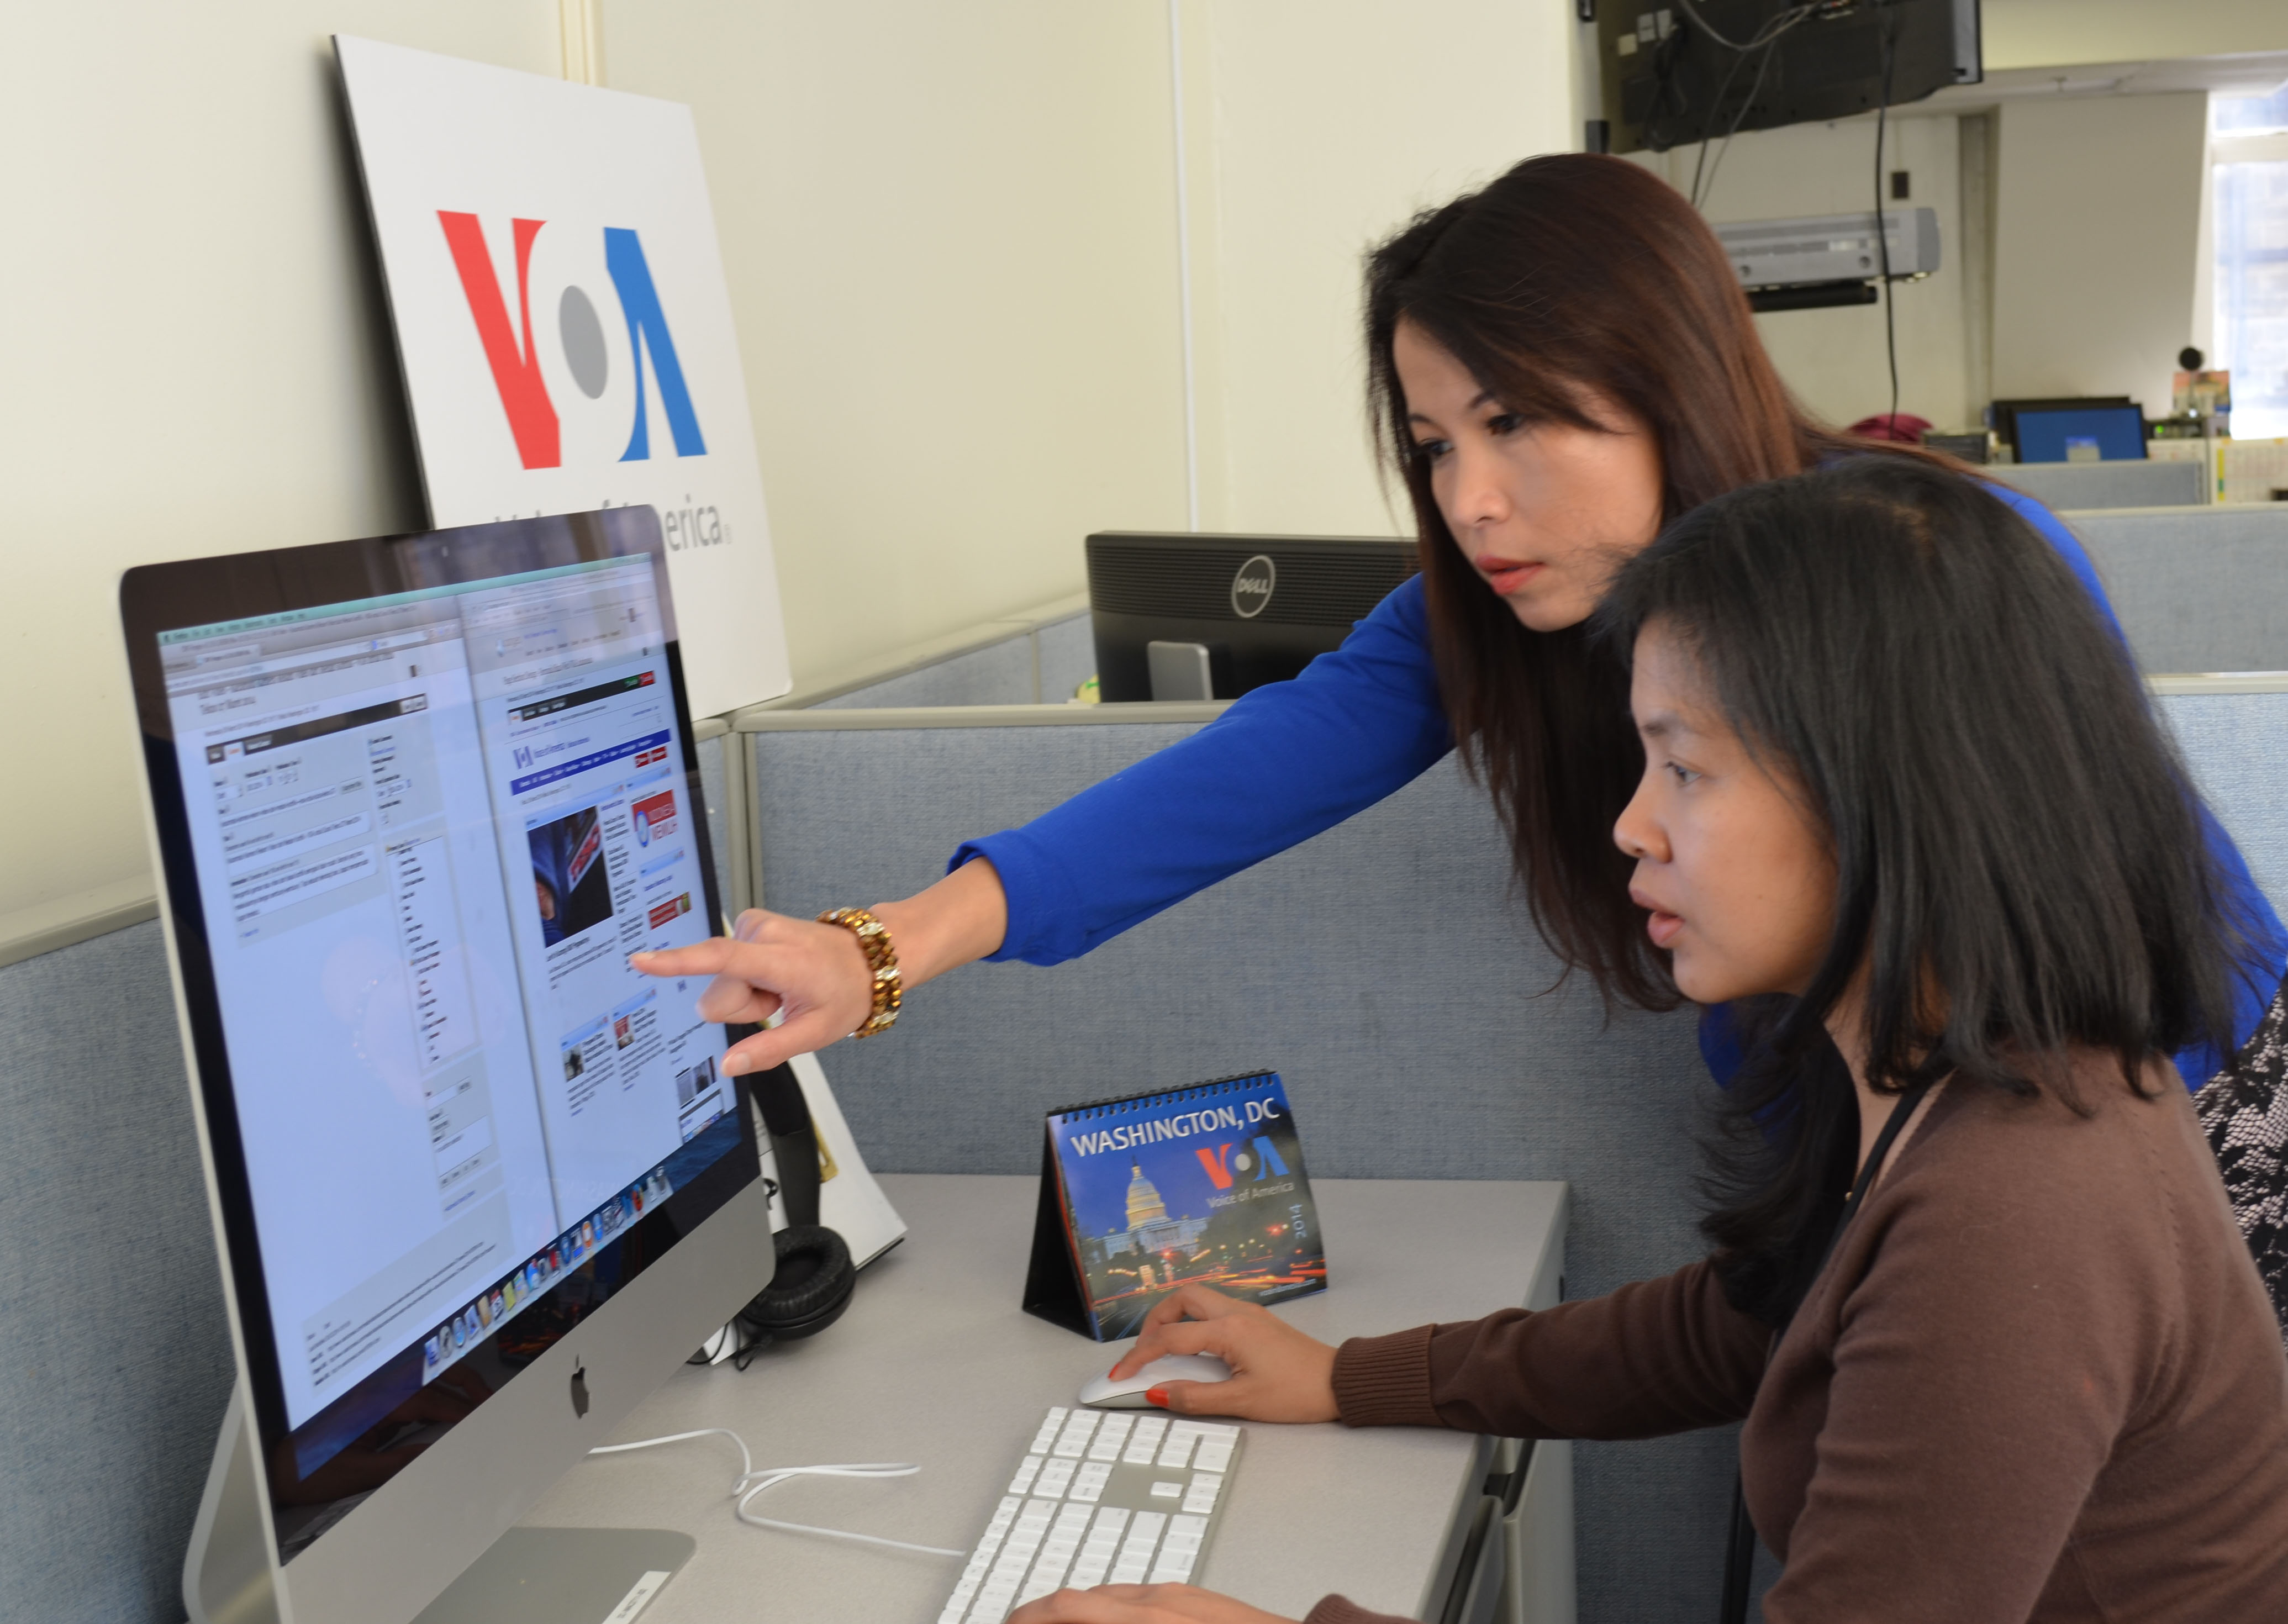 VOA Indonesia Celebrates Two Years with Award Winning CMS